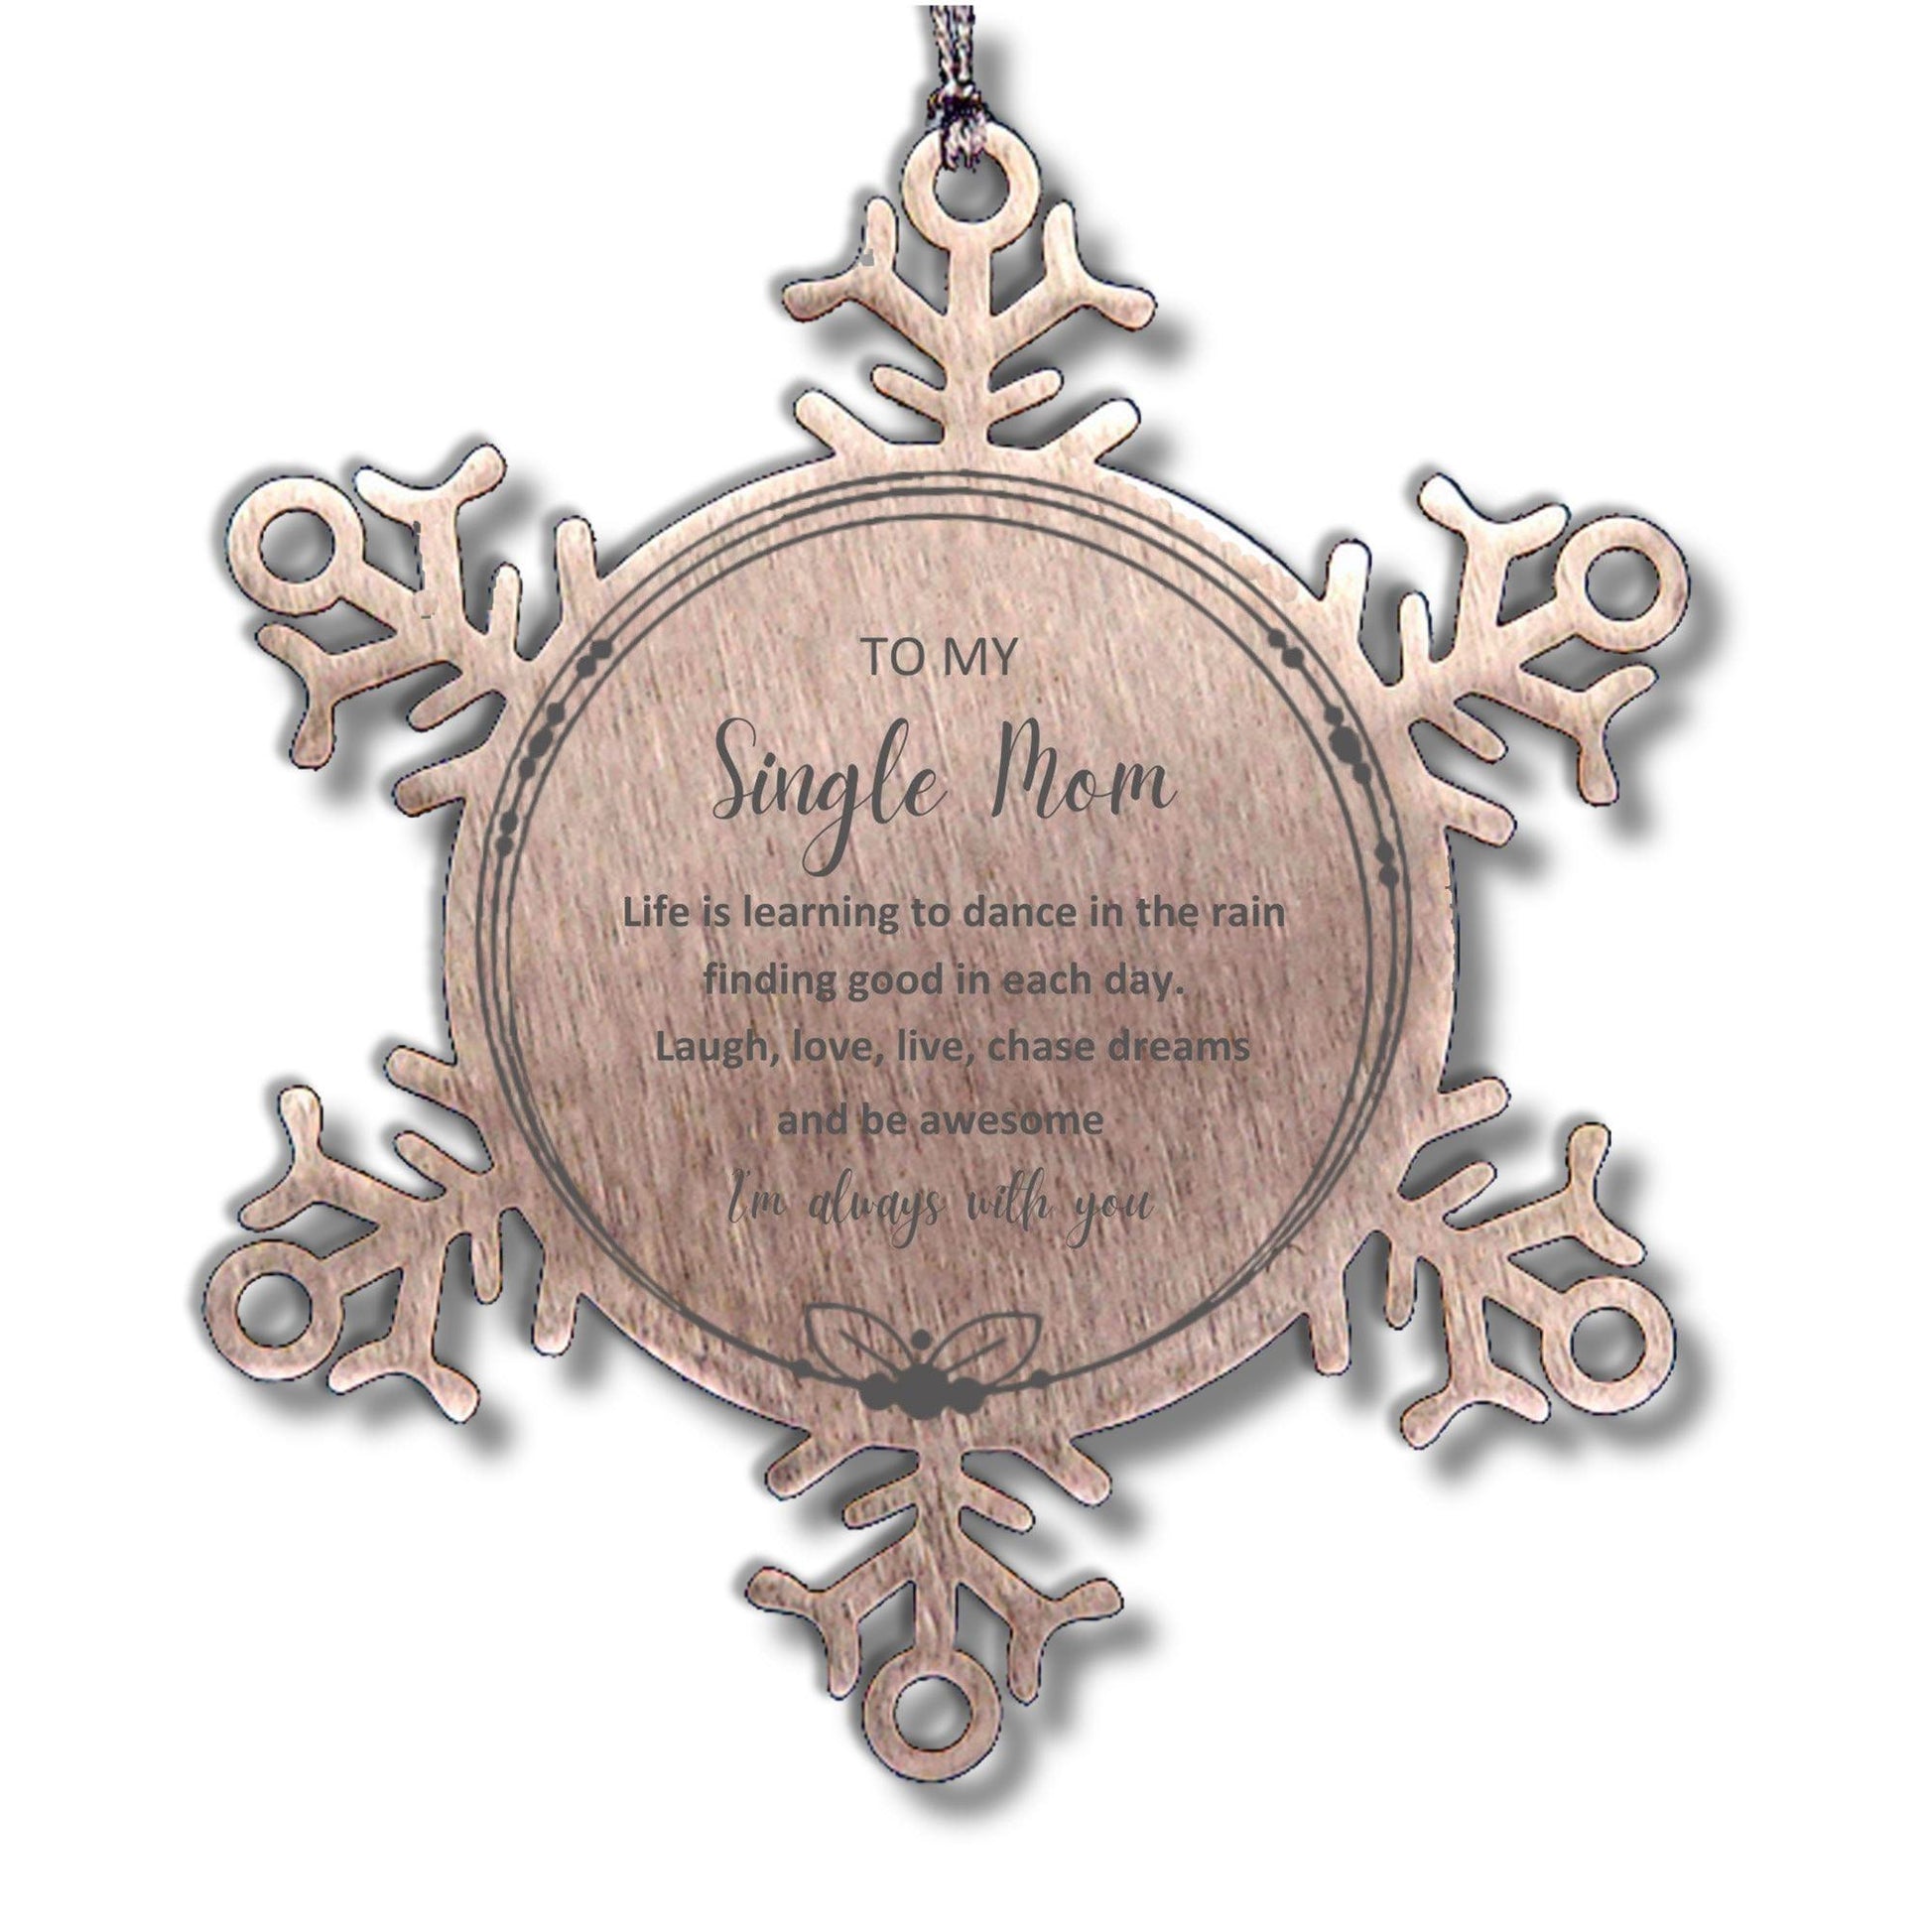 Single Mom Snowflake Ornament, Motivational Birthday Gifts - To My Single Mom Life is learning to dance in the rain, finding good in each day. I'm always with you - Mallard Moon Gift Shop